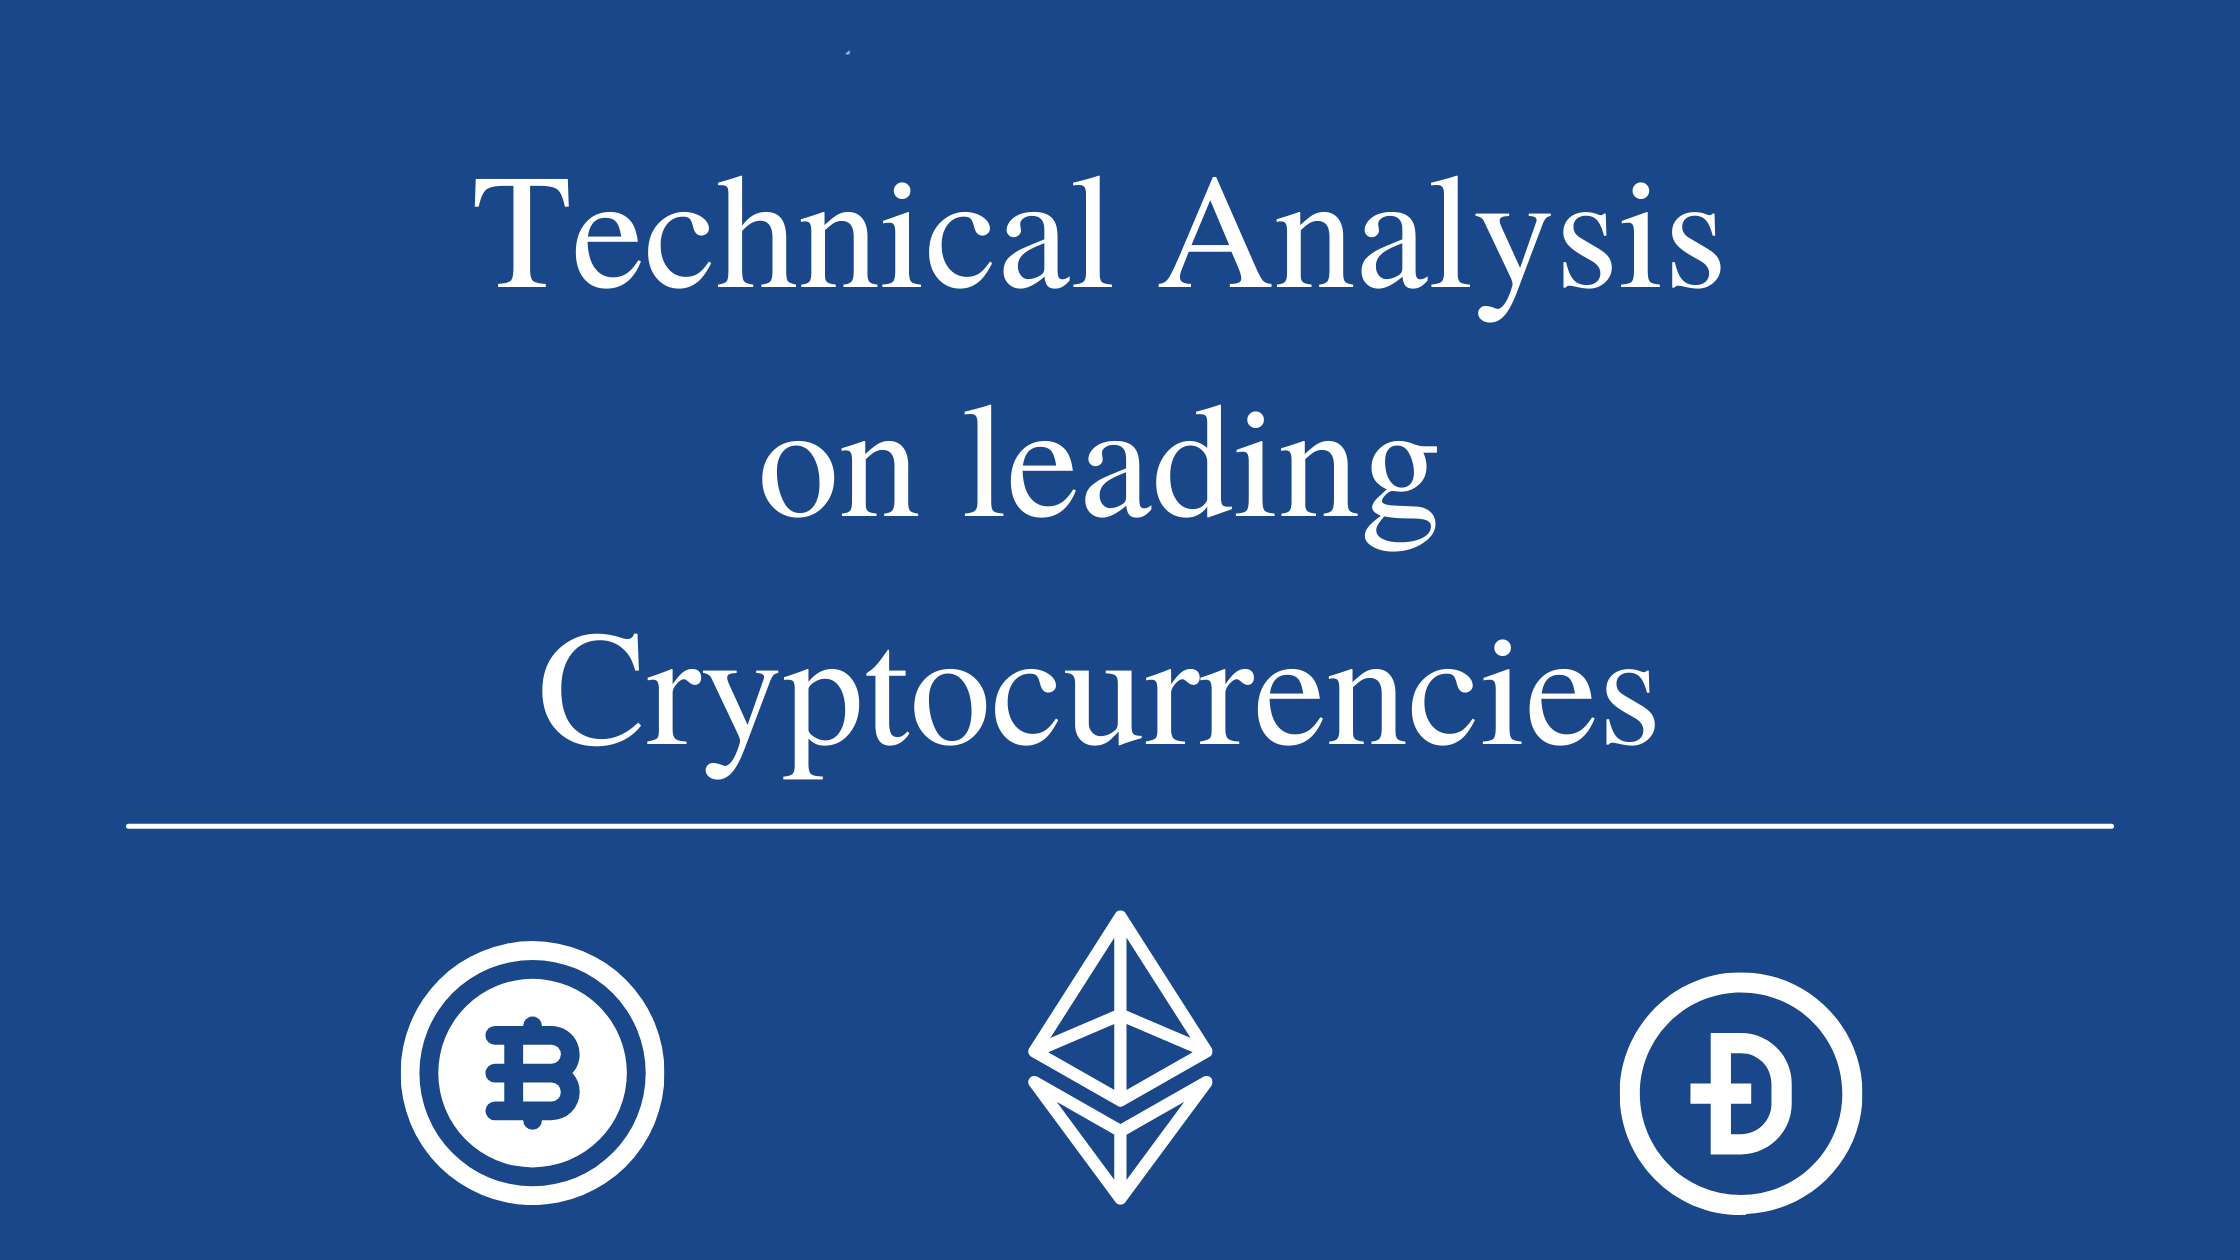 Technical Analysis on Cryptocurrency